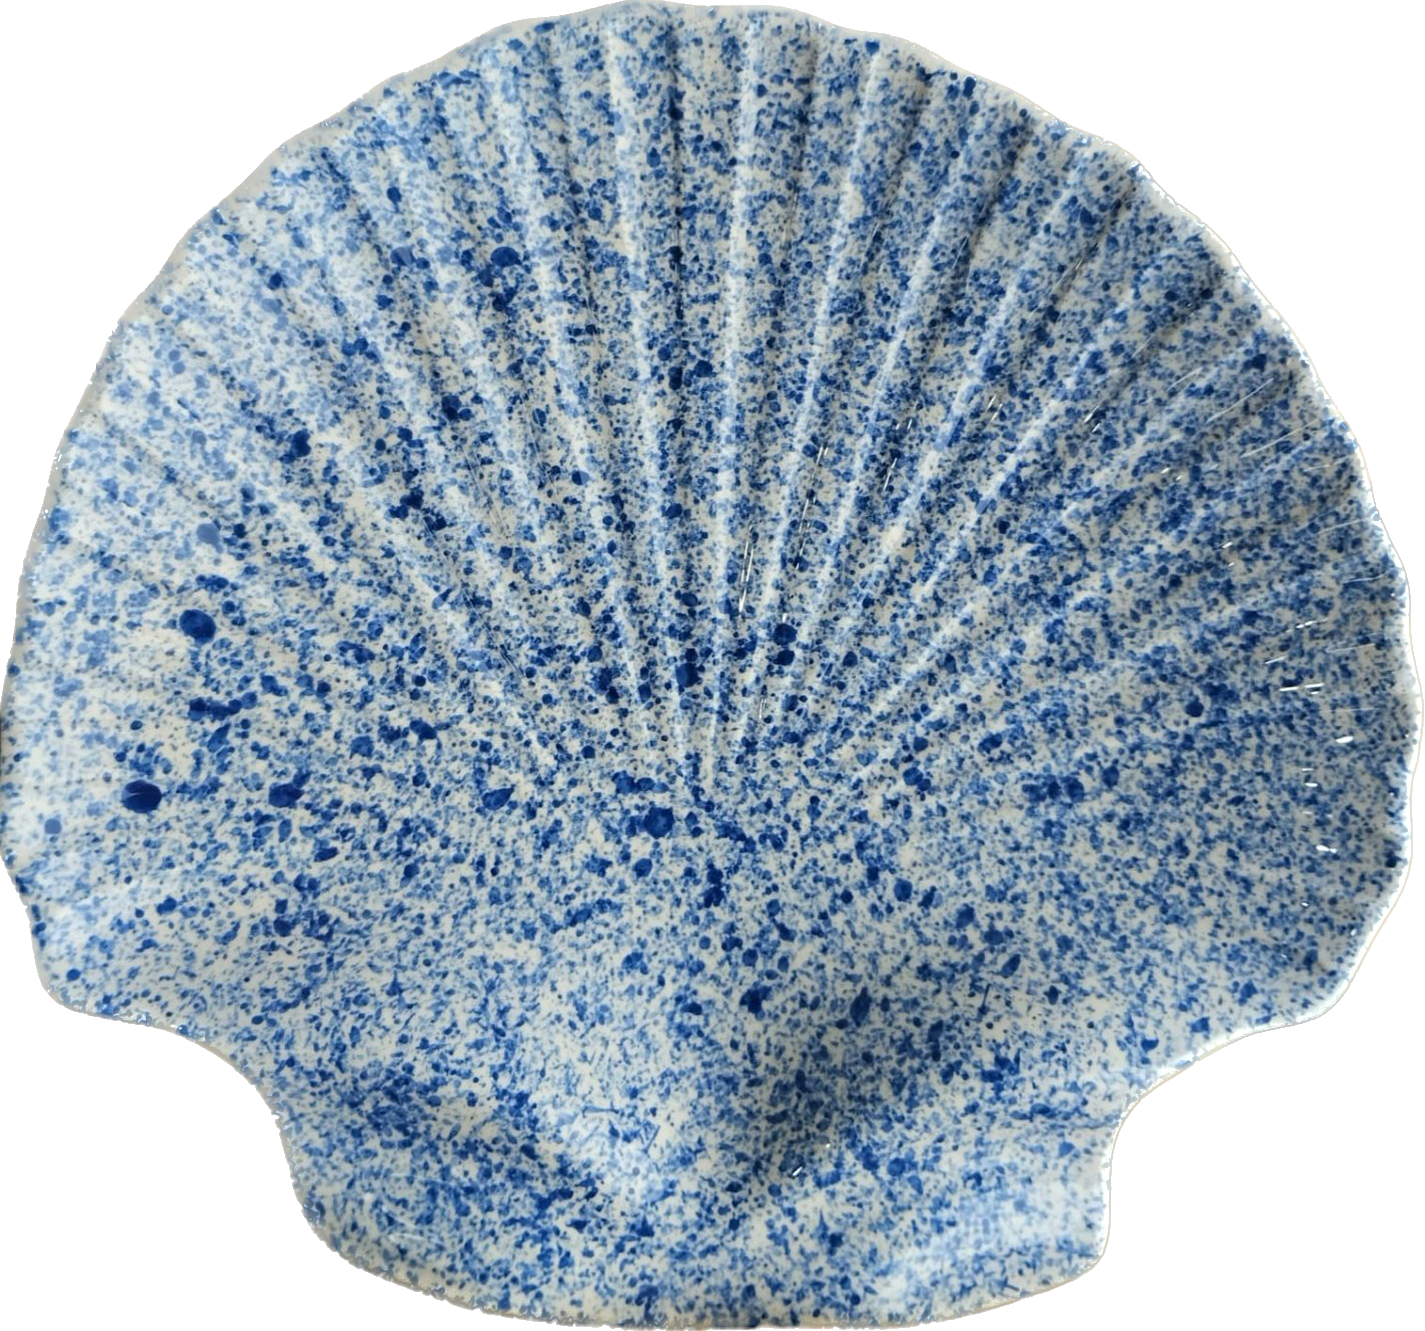 Large Shell Plate